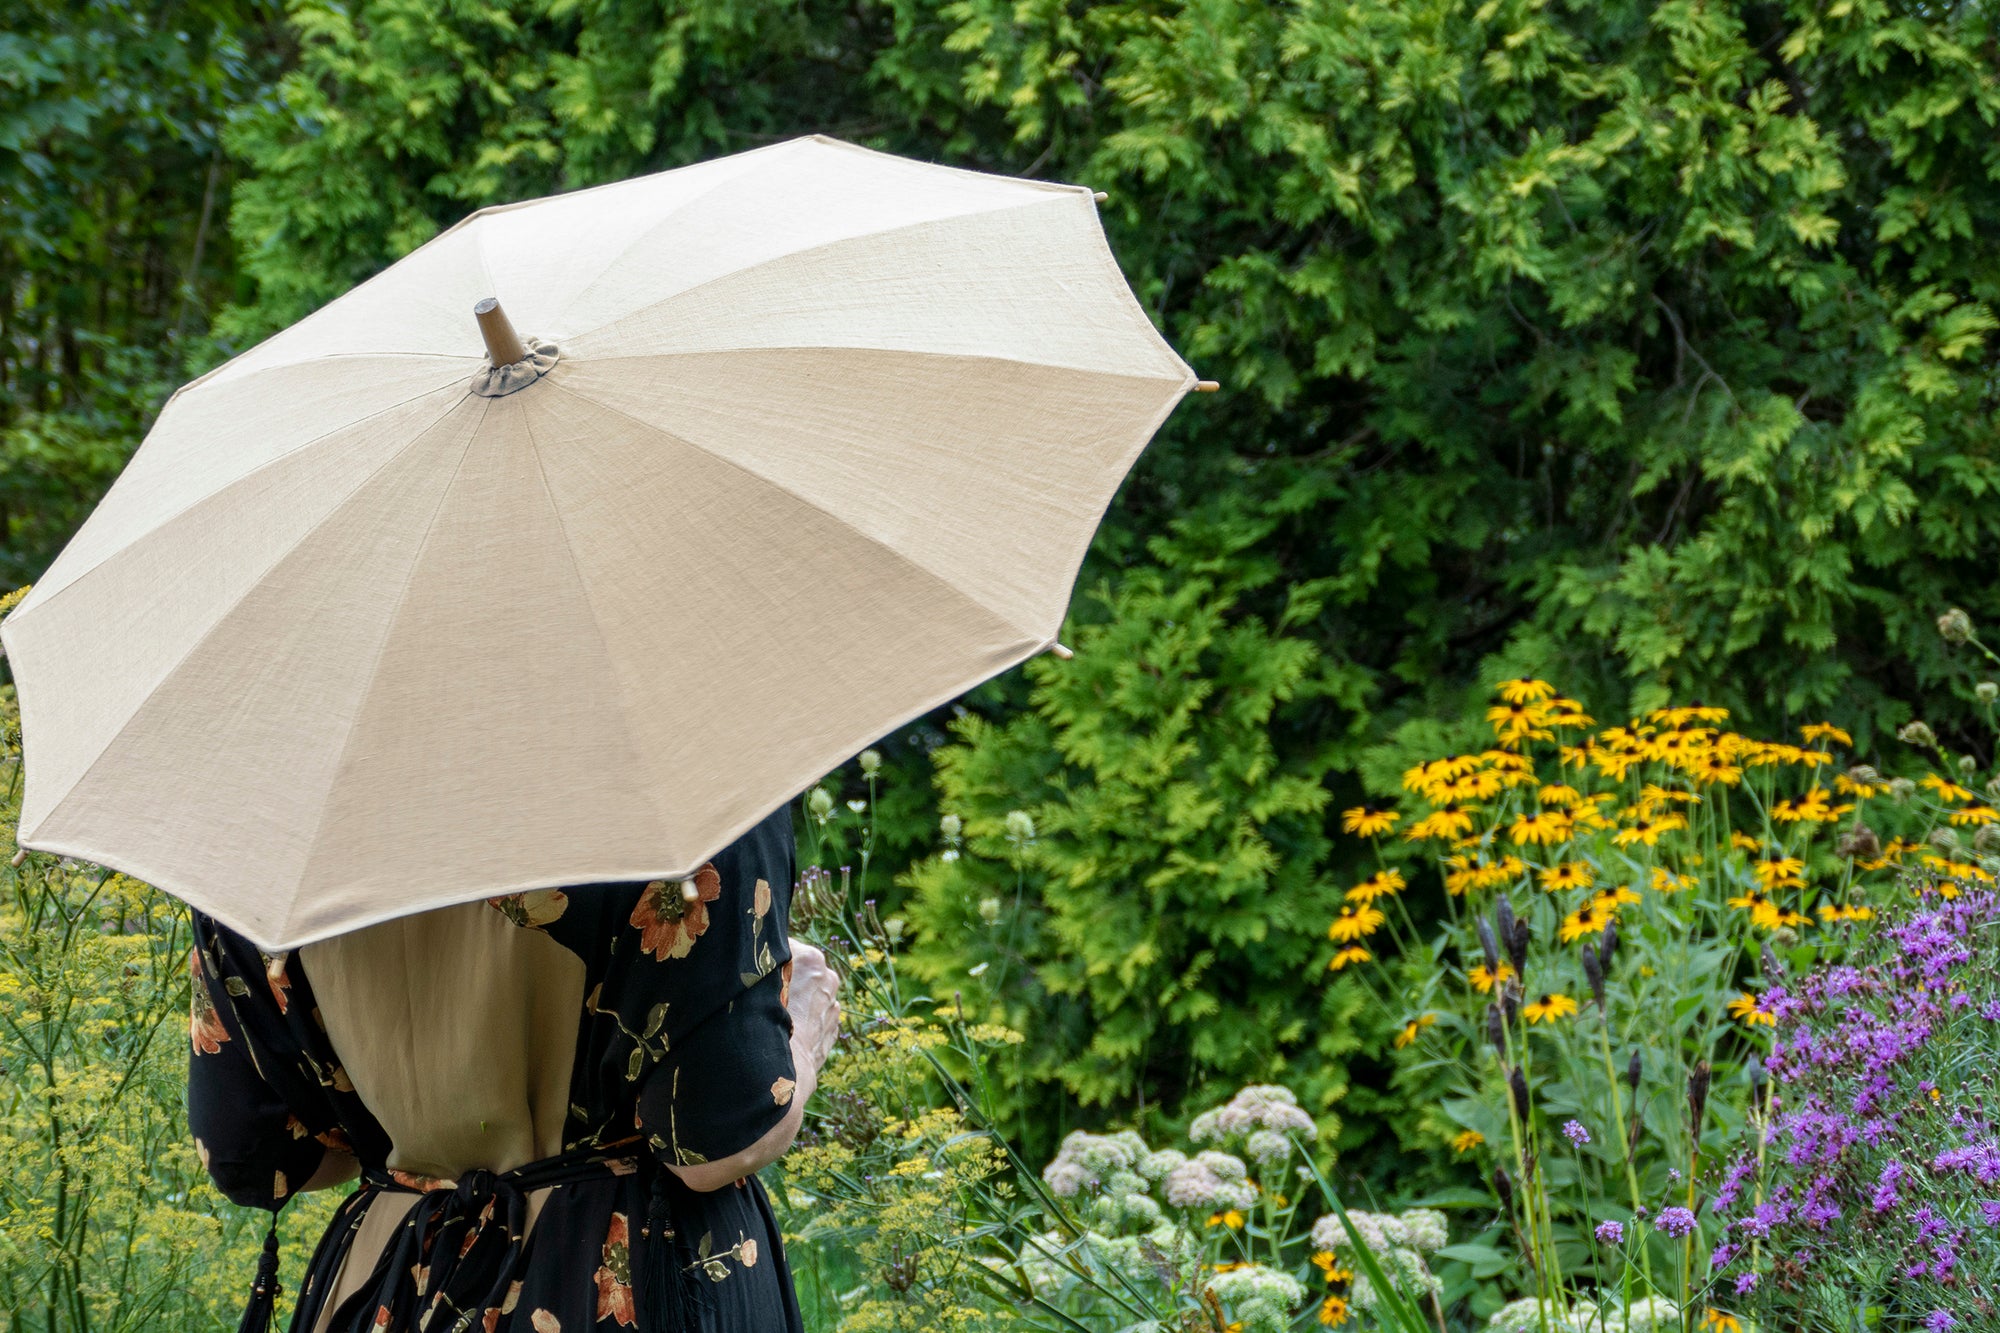 Woman standing in a garden holding a parasol with her back to the camera